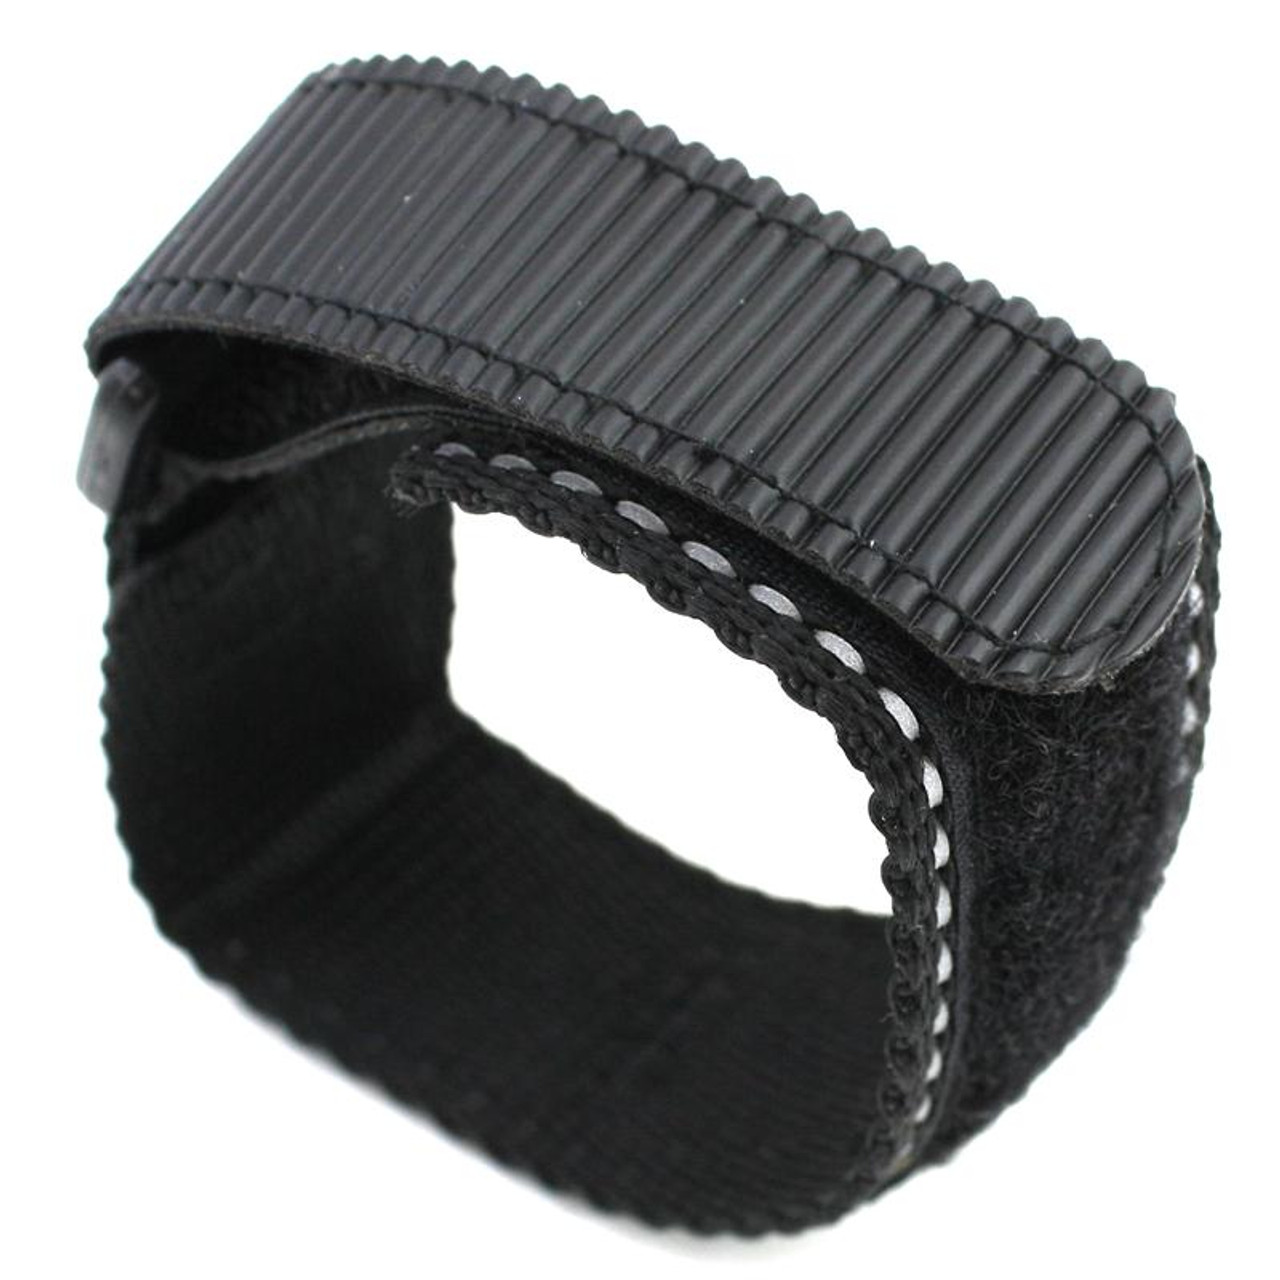 How to Change a Velcro and Nylon Watch Band - Esslinger Watchmaker